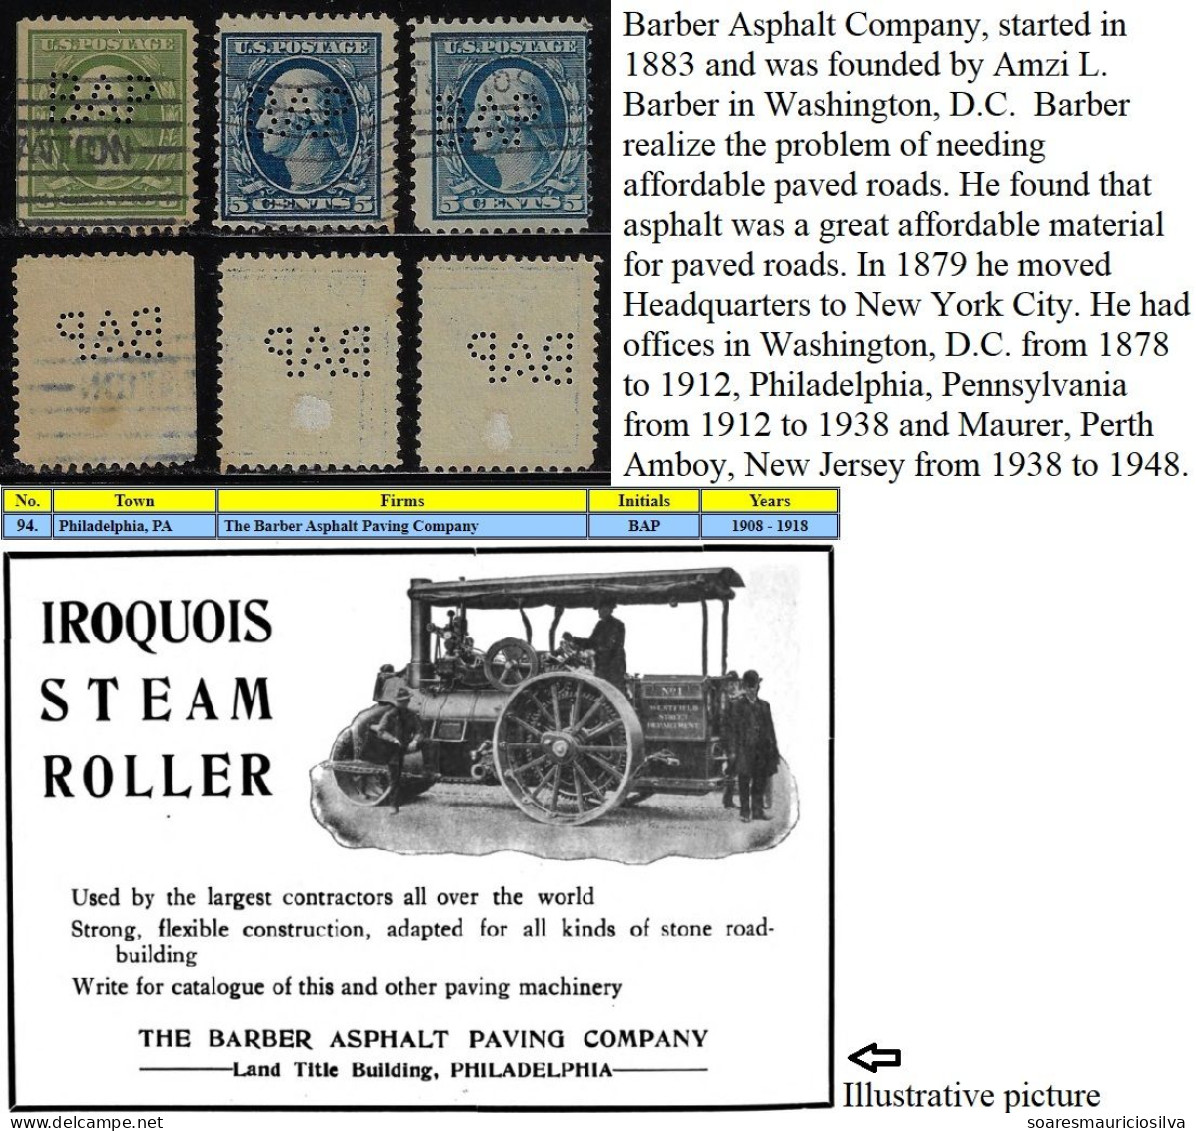 USA United States 1908/1918 3 Stamp Perfin BAP By The Barber Asphalt Paving Company From Philadelphia Lochung Perfore - Perforés